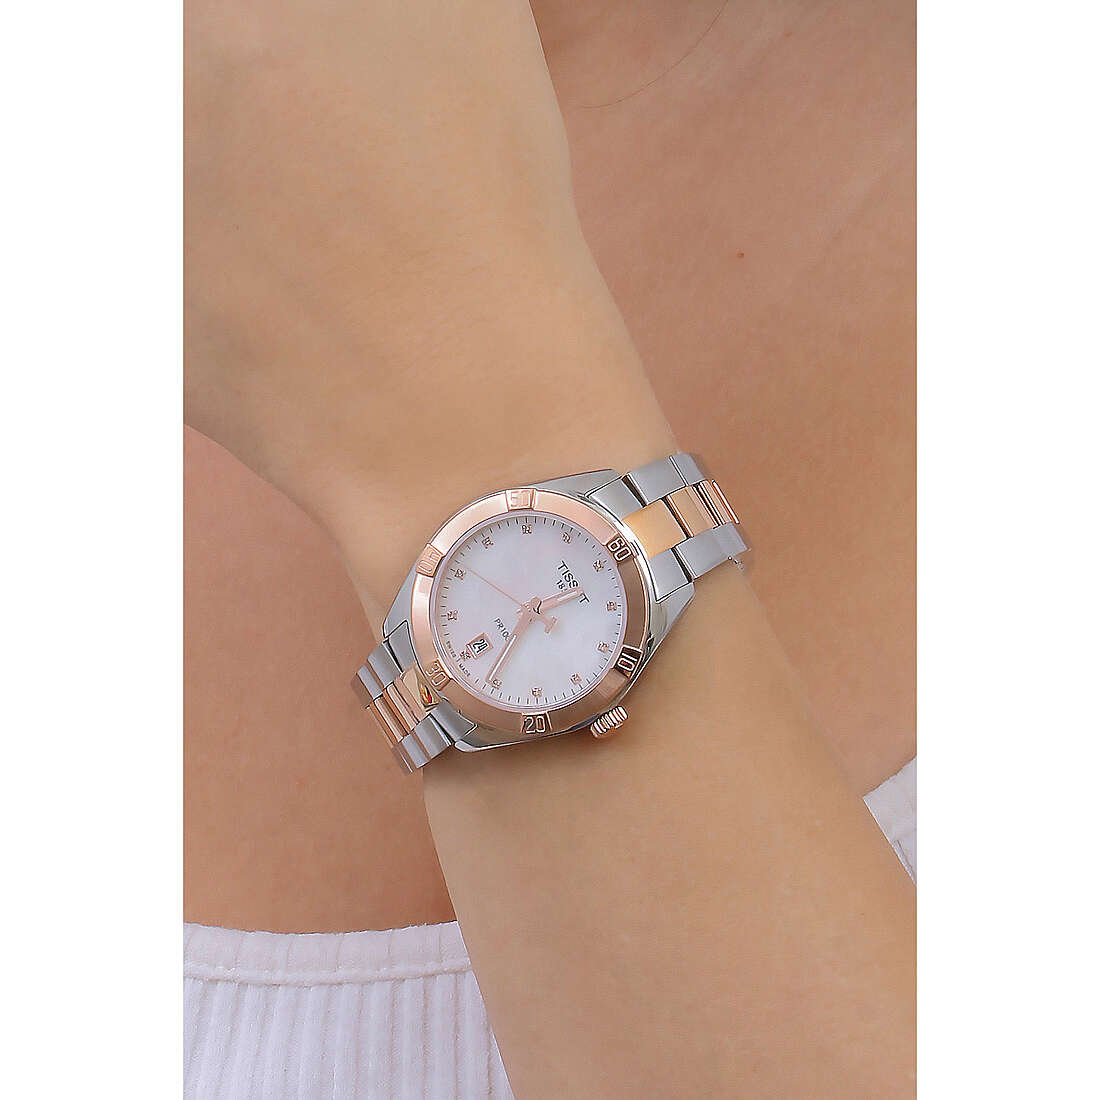 Tissot only time T-Classic Pr 100 woman T1019102211600 wearing